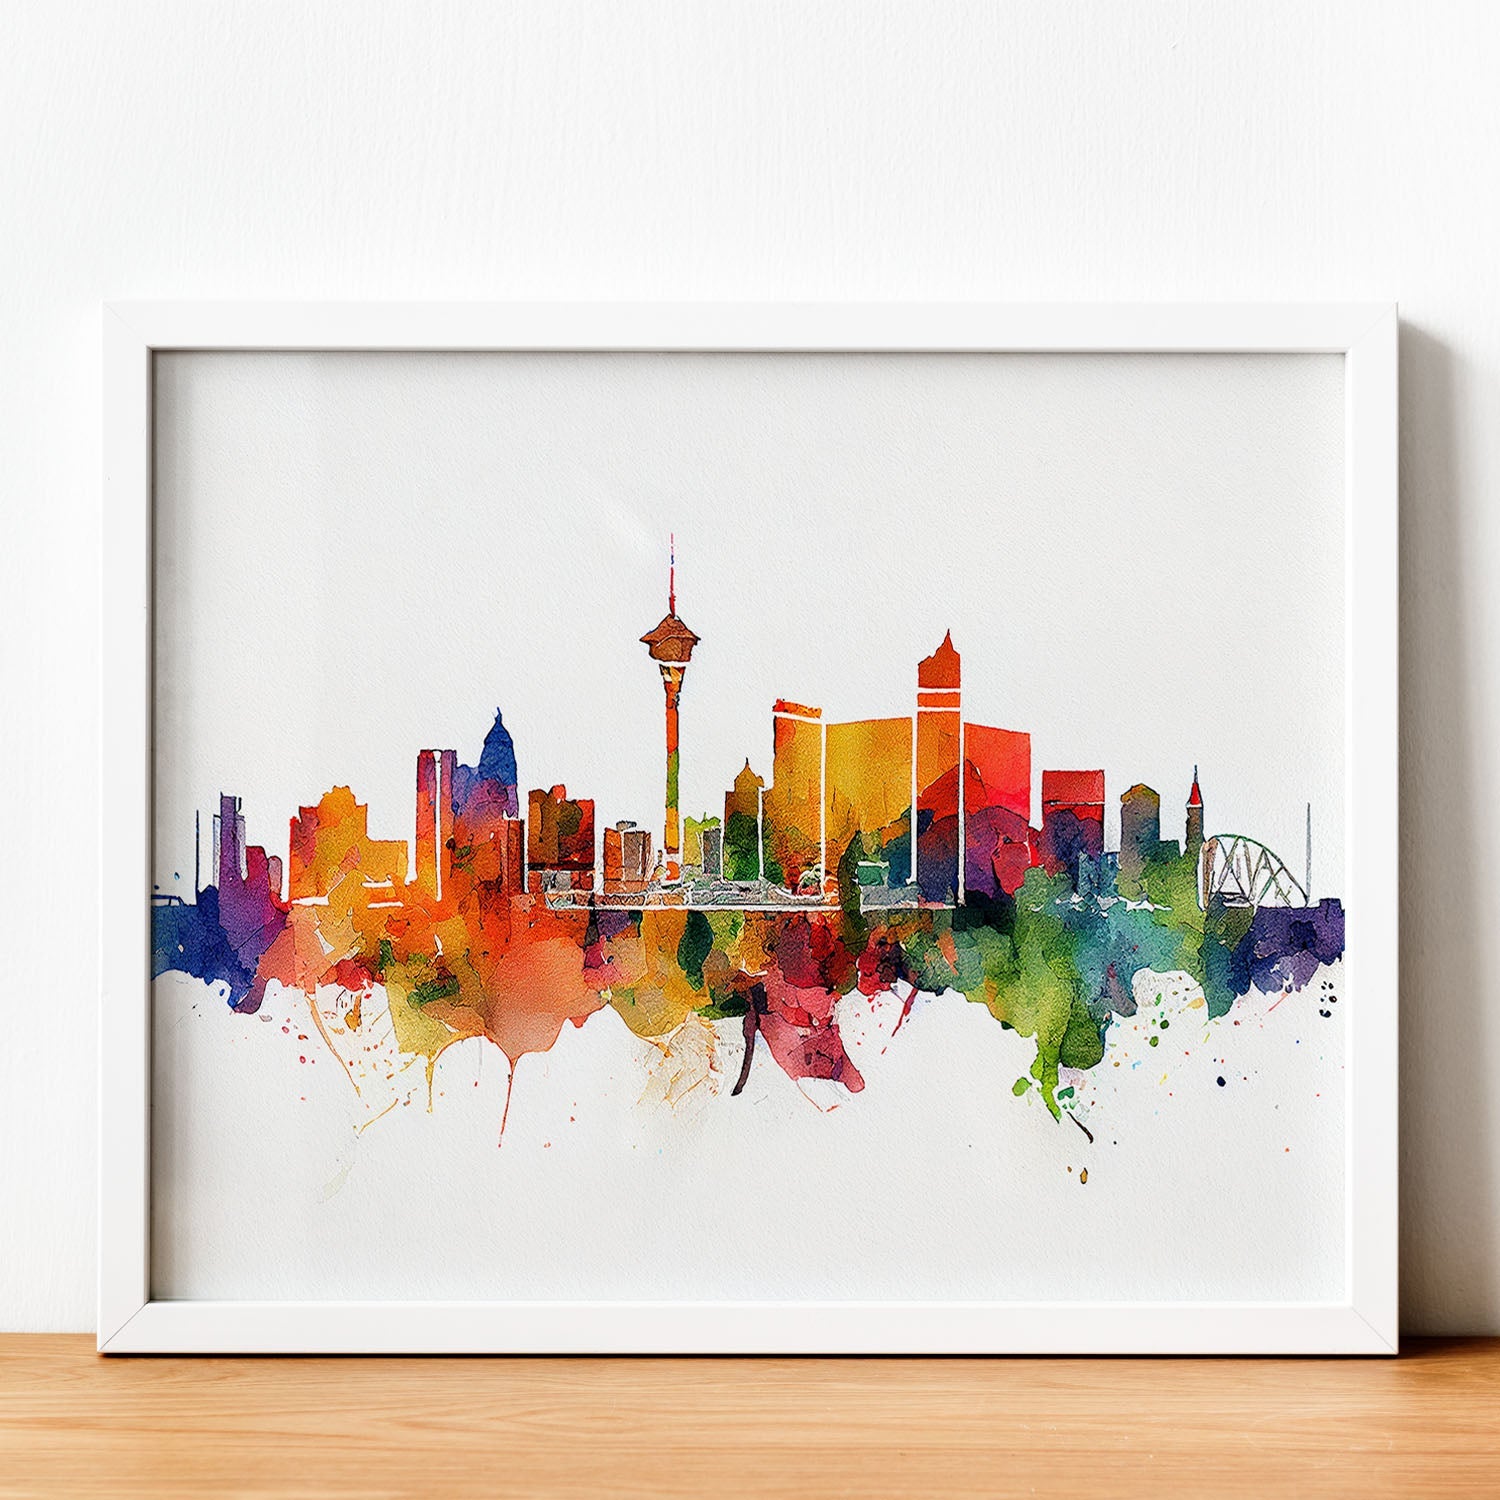 Nacnic watercolor of a skyline of the city of Las Vegas_2. Aesthetic Wall Art Prints for Bedroom or Living Room Design.-Artwork-Nacnic-A4-Sin Marco-Nacnic Estudio SL